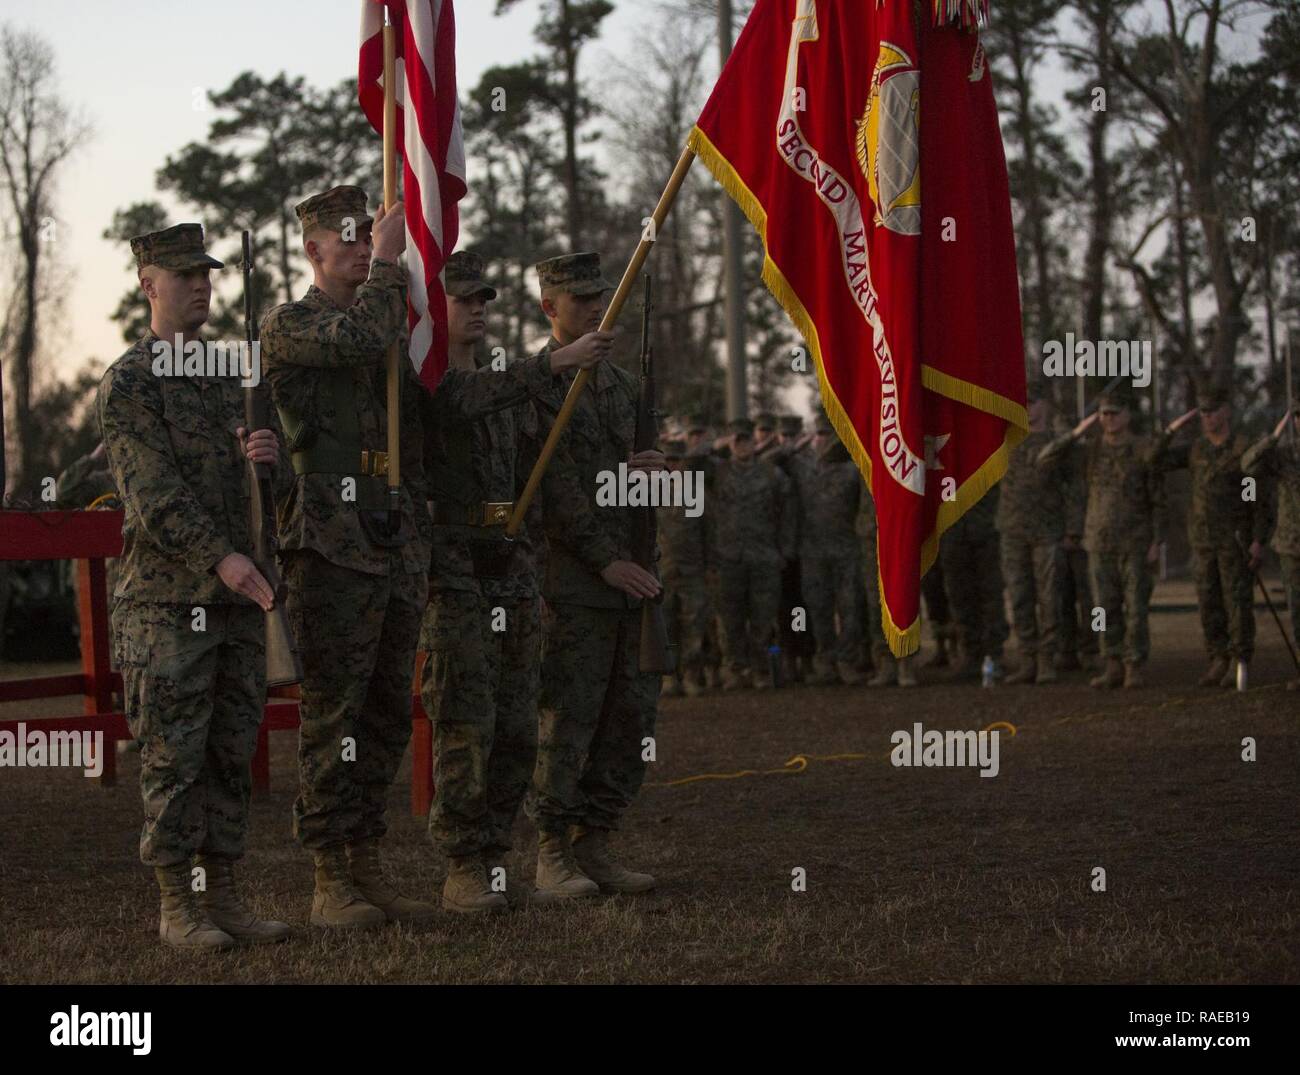 U.S. Marines with the 2nd Marine Division (2d MARDIV) color guard, deliver the battle colors before the 2d MARDIV 50-mile challenge hike on Camp Lejeune, N.C., Feb. 1, 2017. The hike was held to challenge Marines of 2d MARDIV as well as test their skill and will. Stock Photo